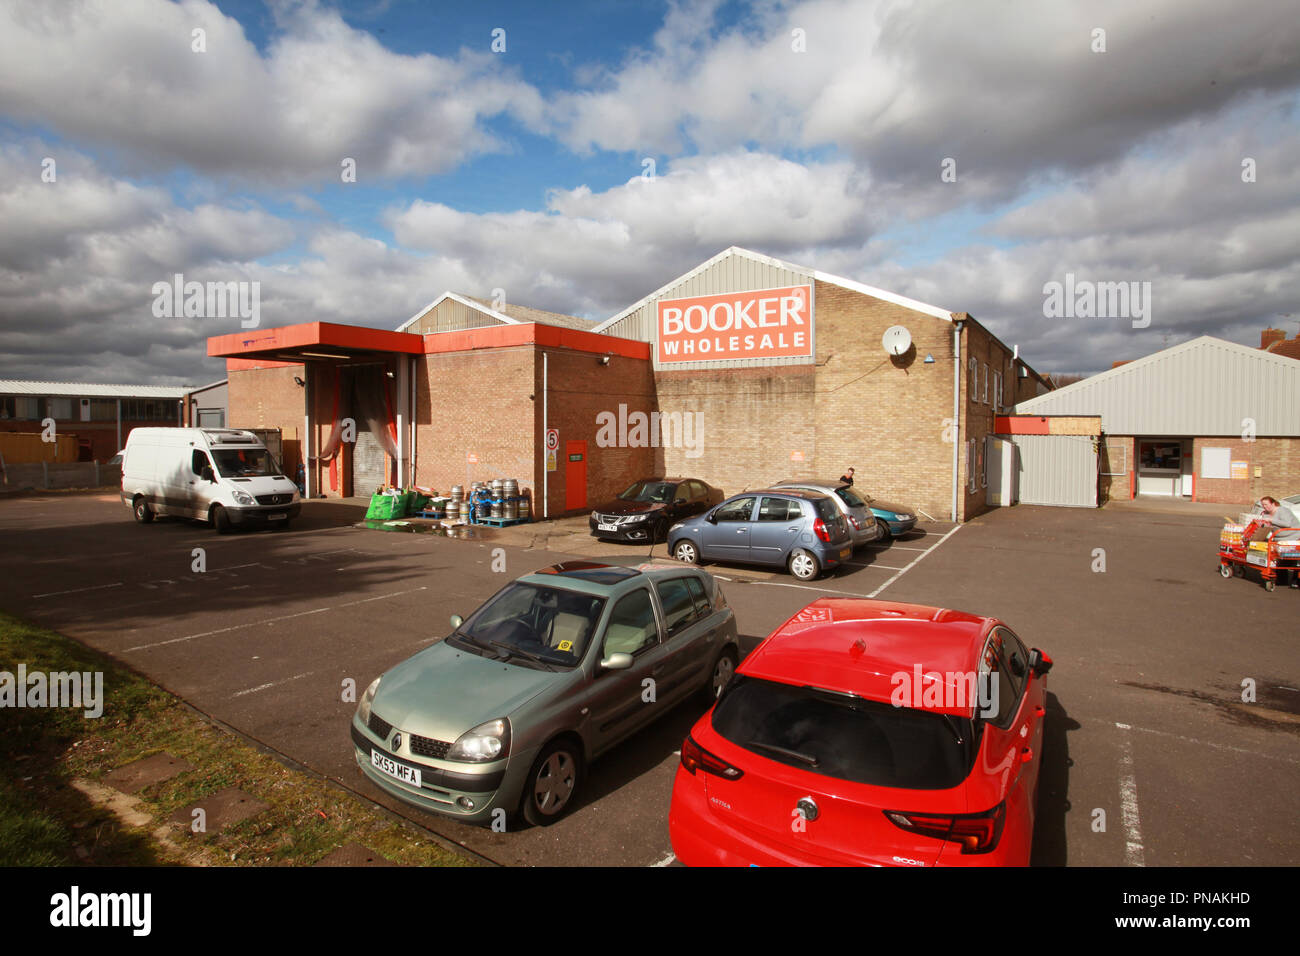 Booker wholesale depot Chelmsford Essex England Stock Photo